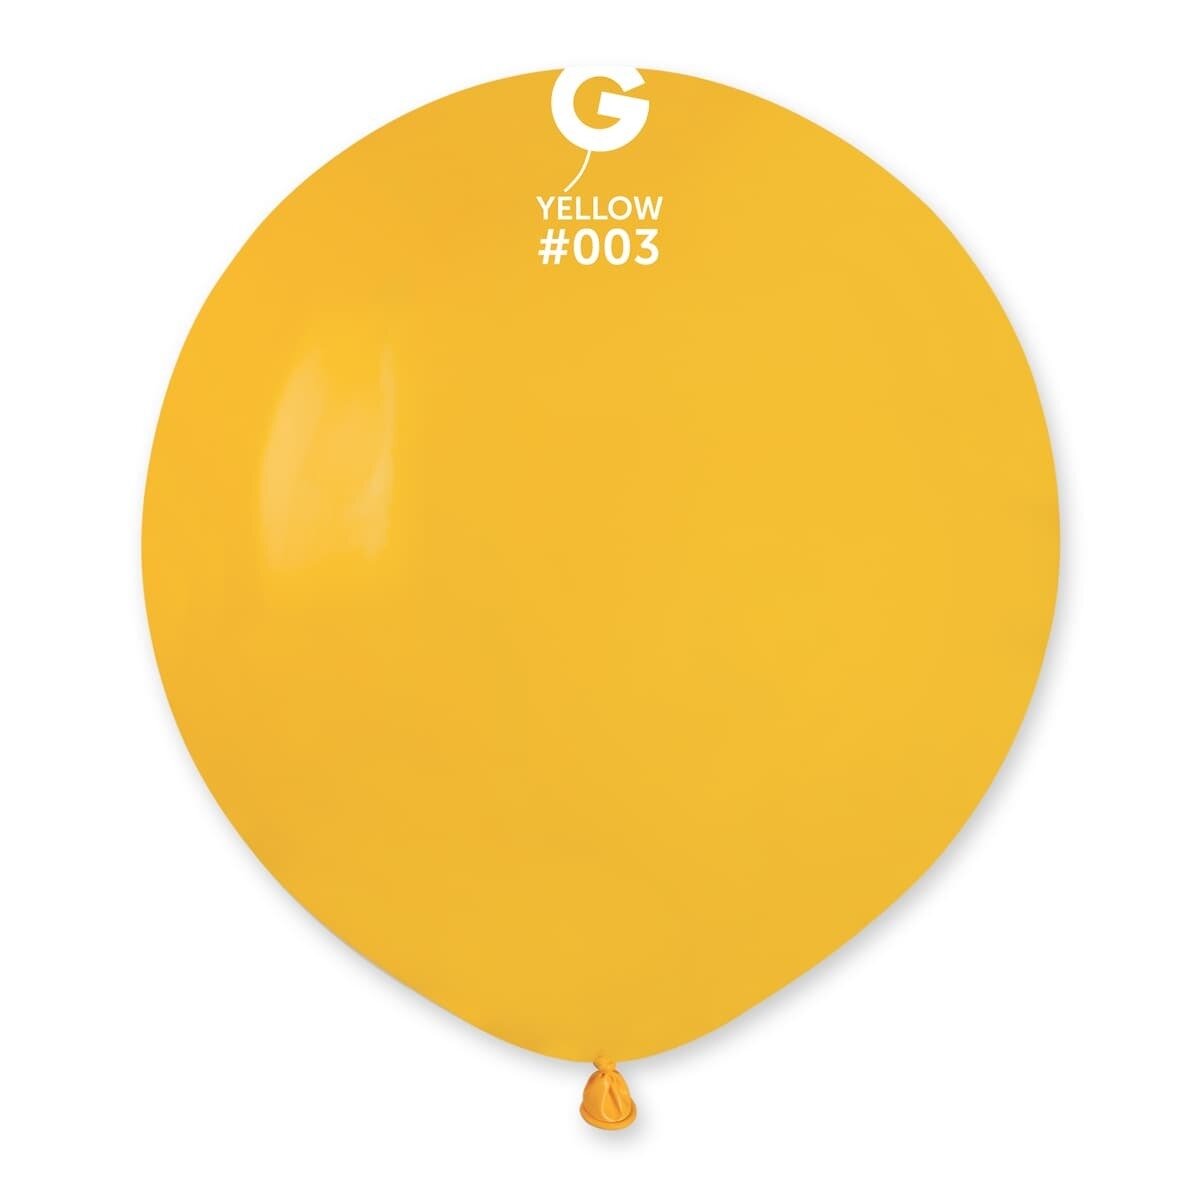 Standard Yellow #003 19in - 25 pieces